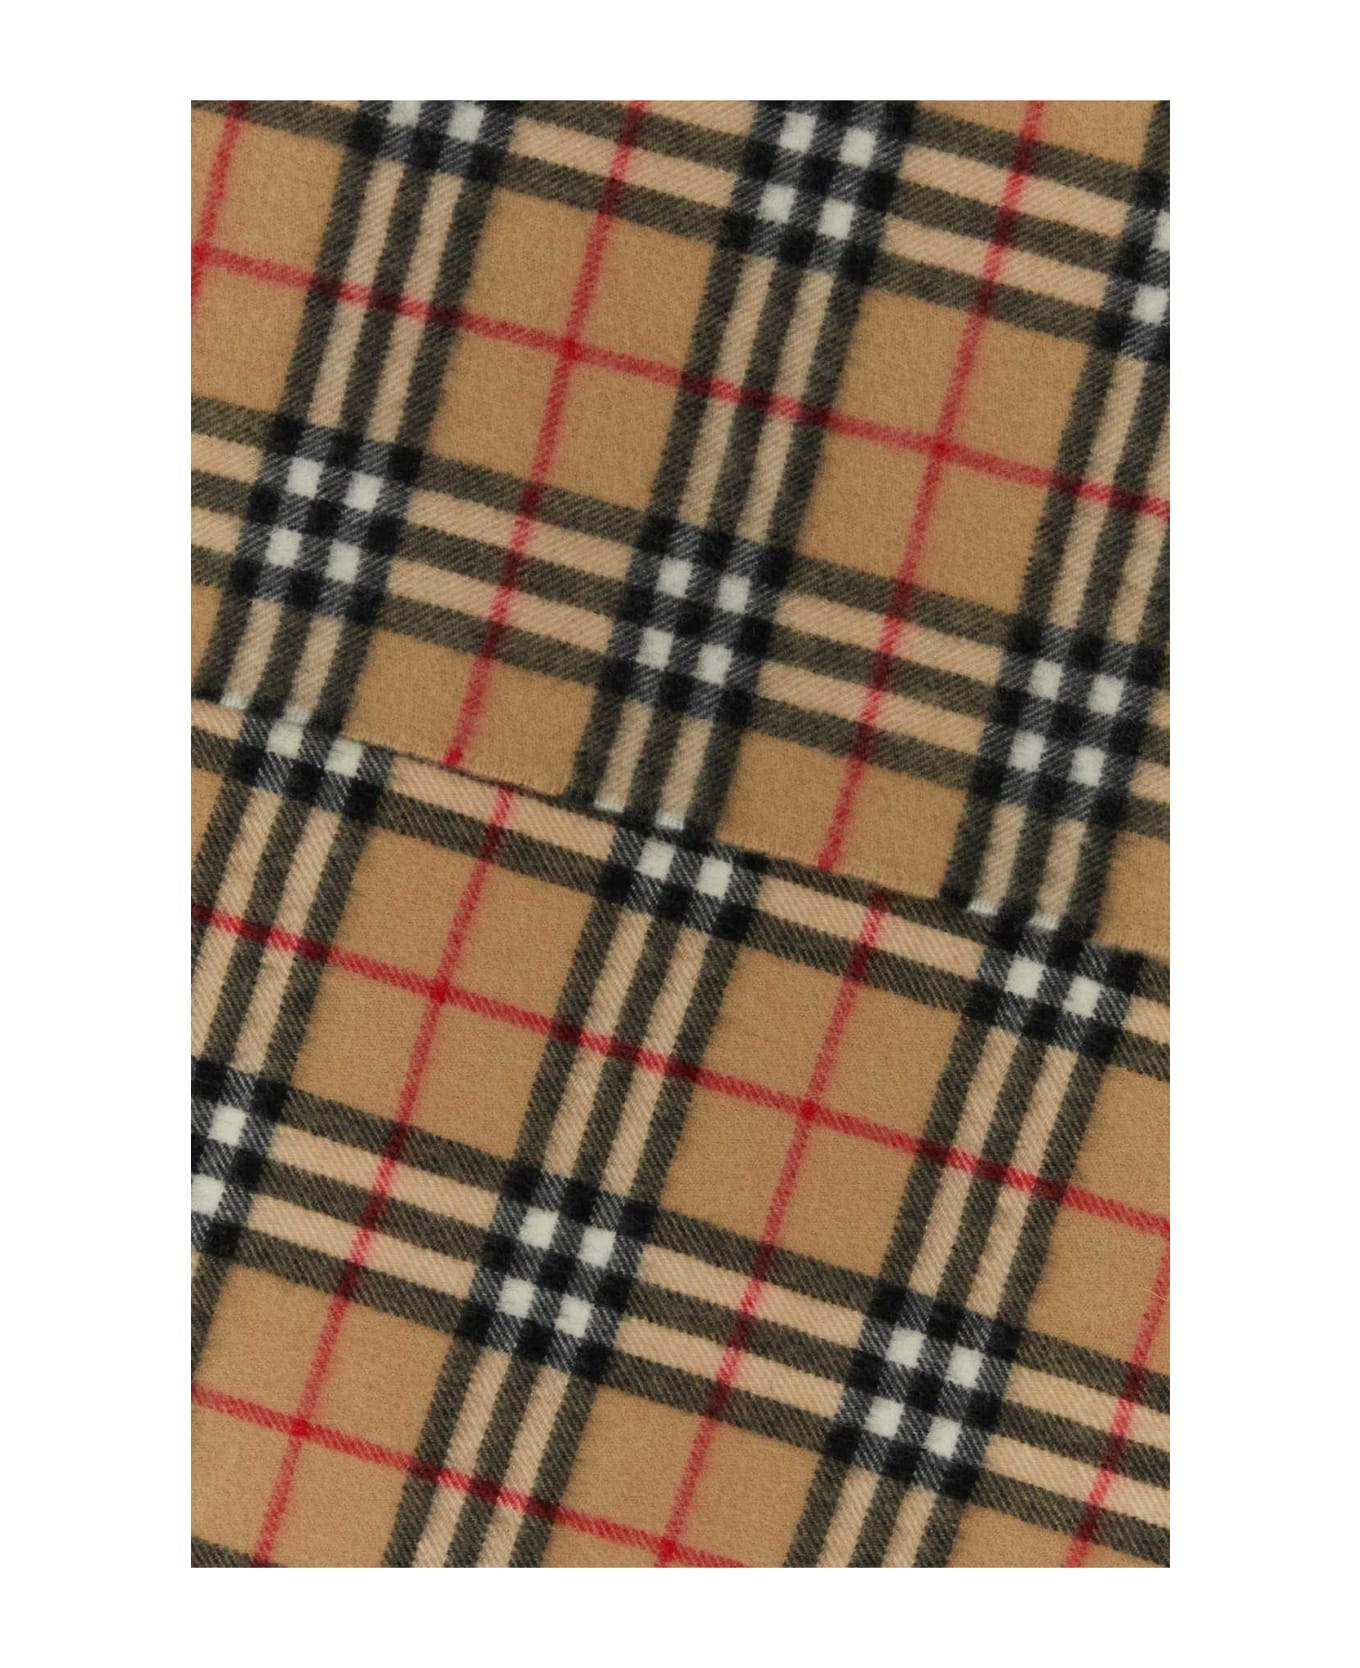 Burberry Embroidered Cashmere Scarf - ARCHIVEBEIGE